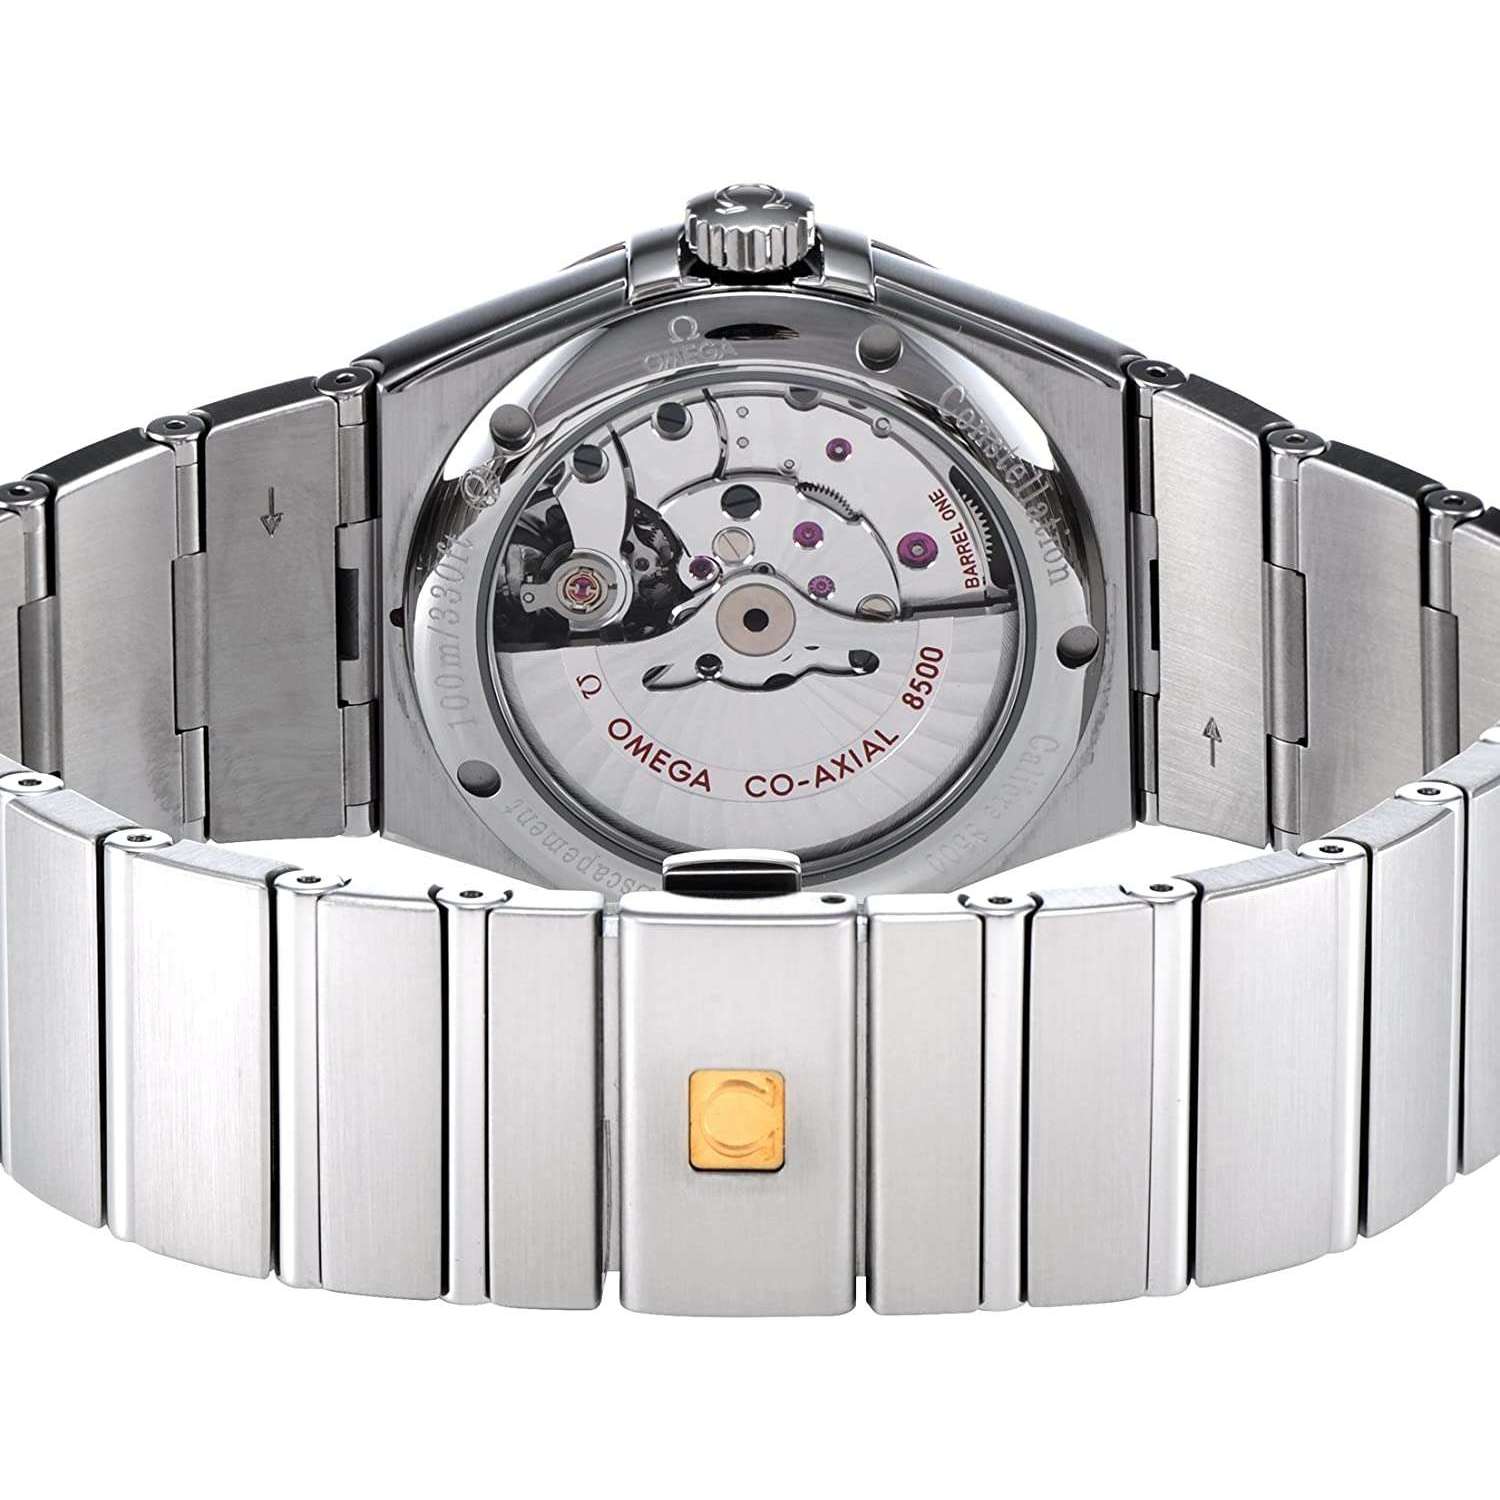 ROOK JAPAN:OMEGA CONSTELLATION CO-AXIAL CHRONOMETER 38 MM MEN WATCH 123.10.38.21.01.002,Luxury Watch,Omega